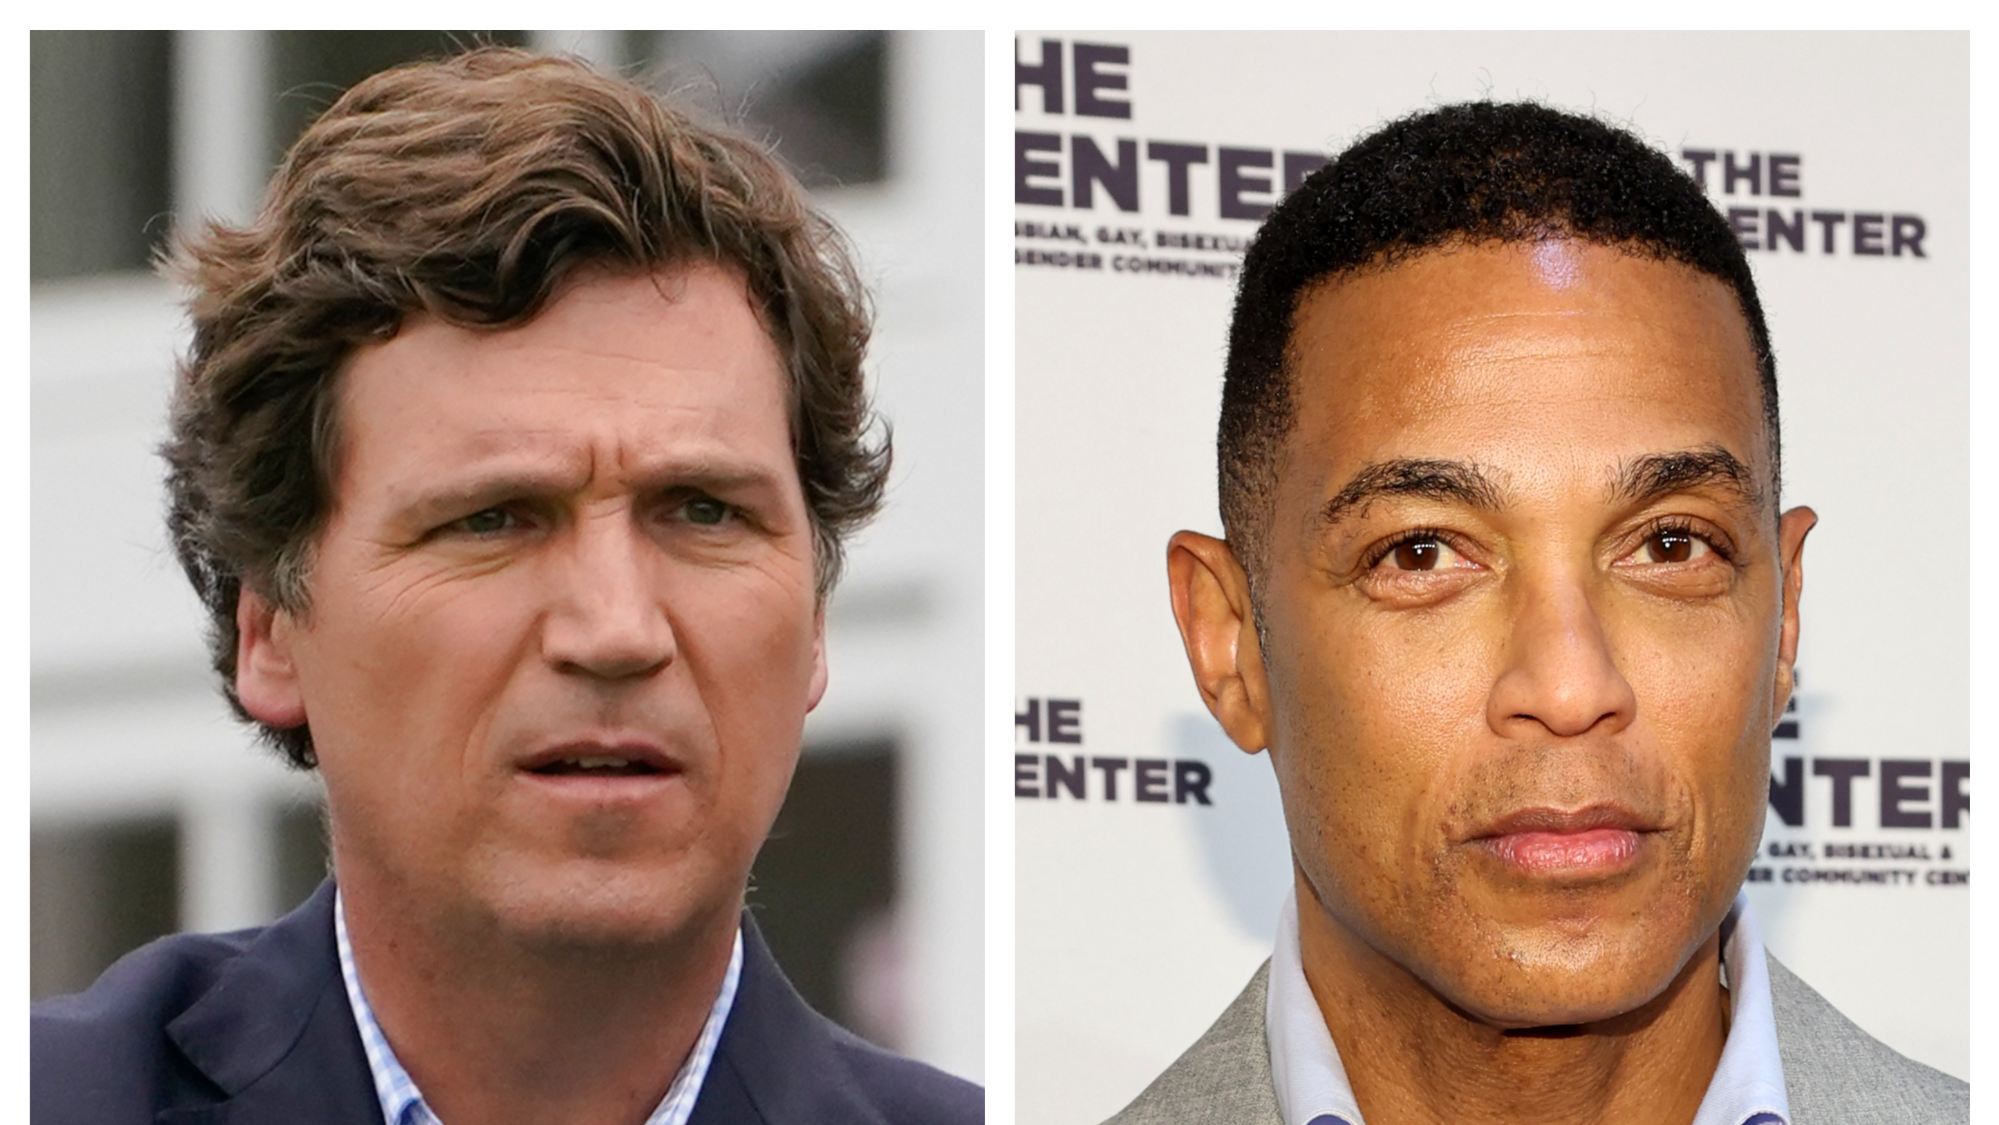 Tucker Carlson (left) has "parted ways" with Fox News. Don Lemon (right) was fired – or not fired, depending who you ask – from CNN.